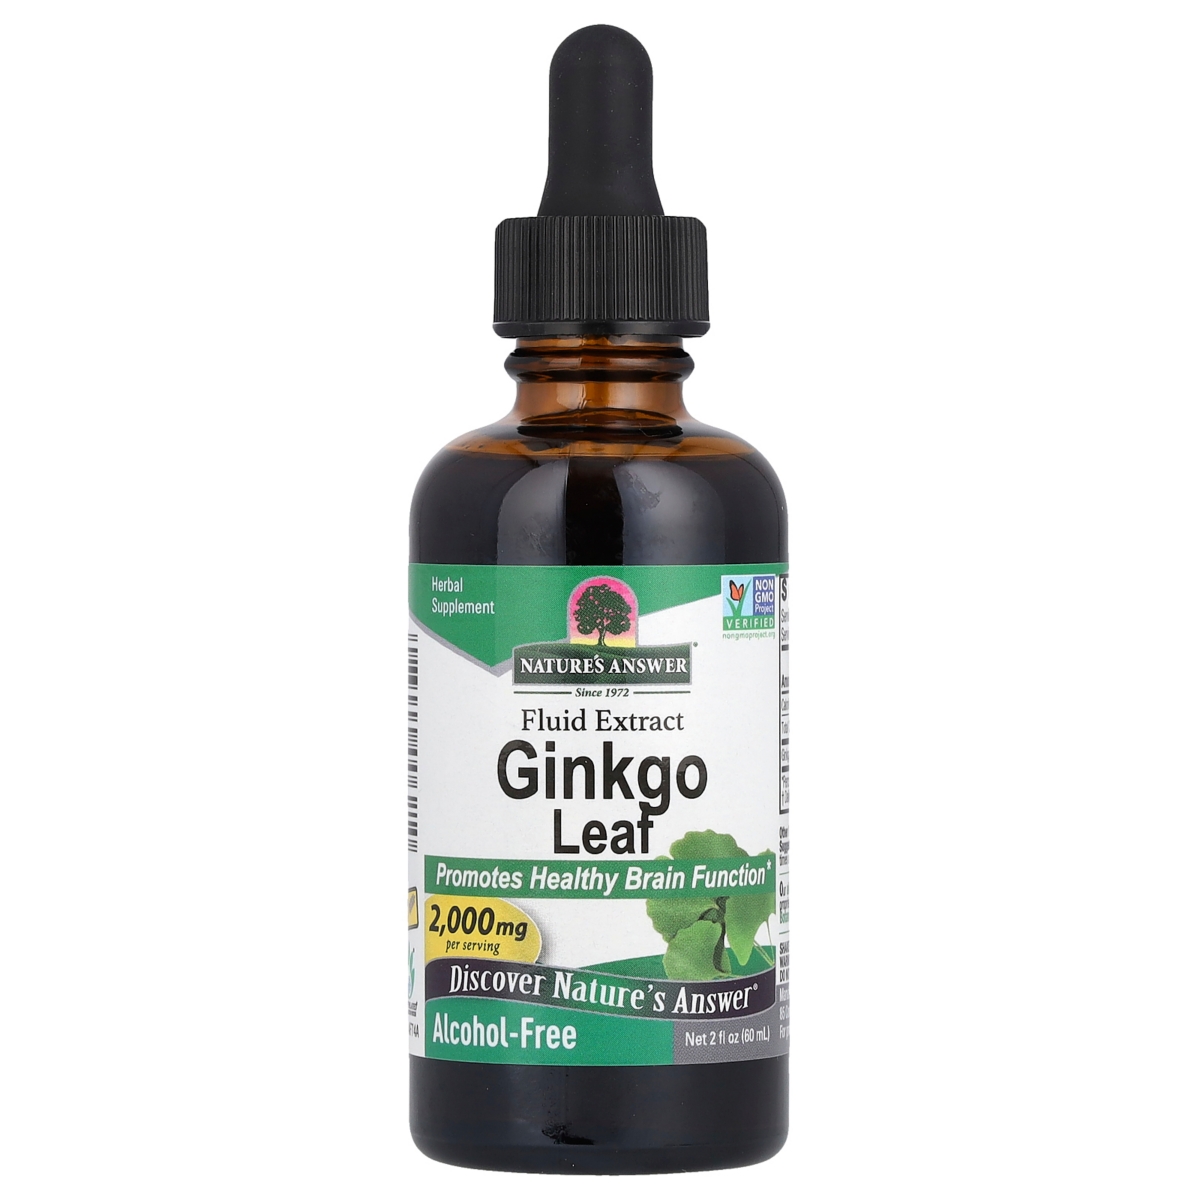 Ginkgo Leaf Fluid Extract Alcohol-Free 2 000 mg 2 fl oz (60 ml) (1 - 000 - Assorted Pre-pack (See Table